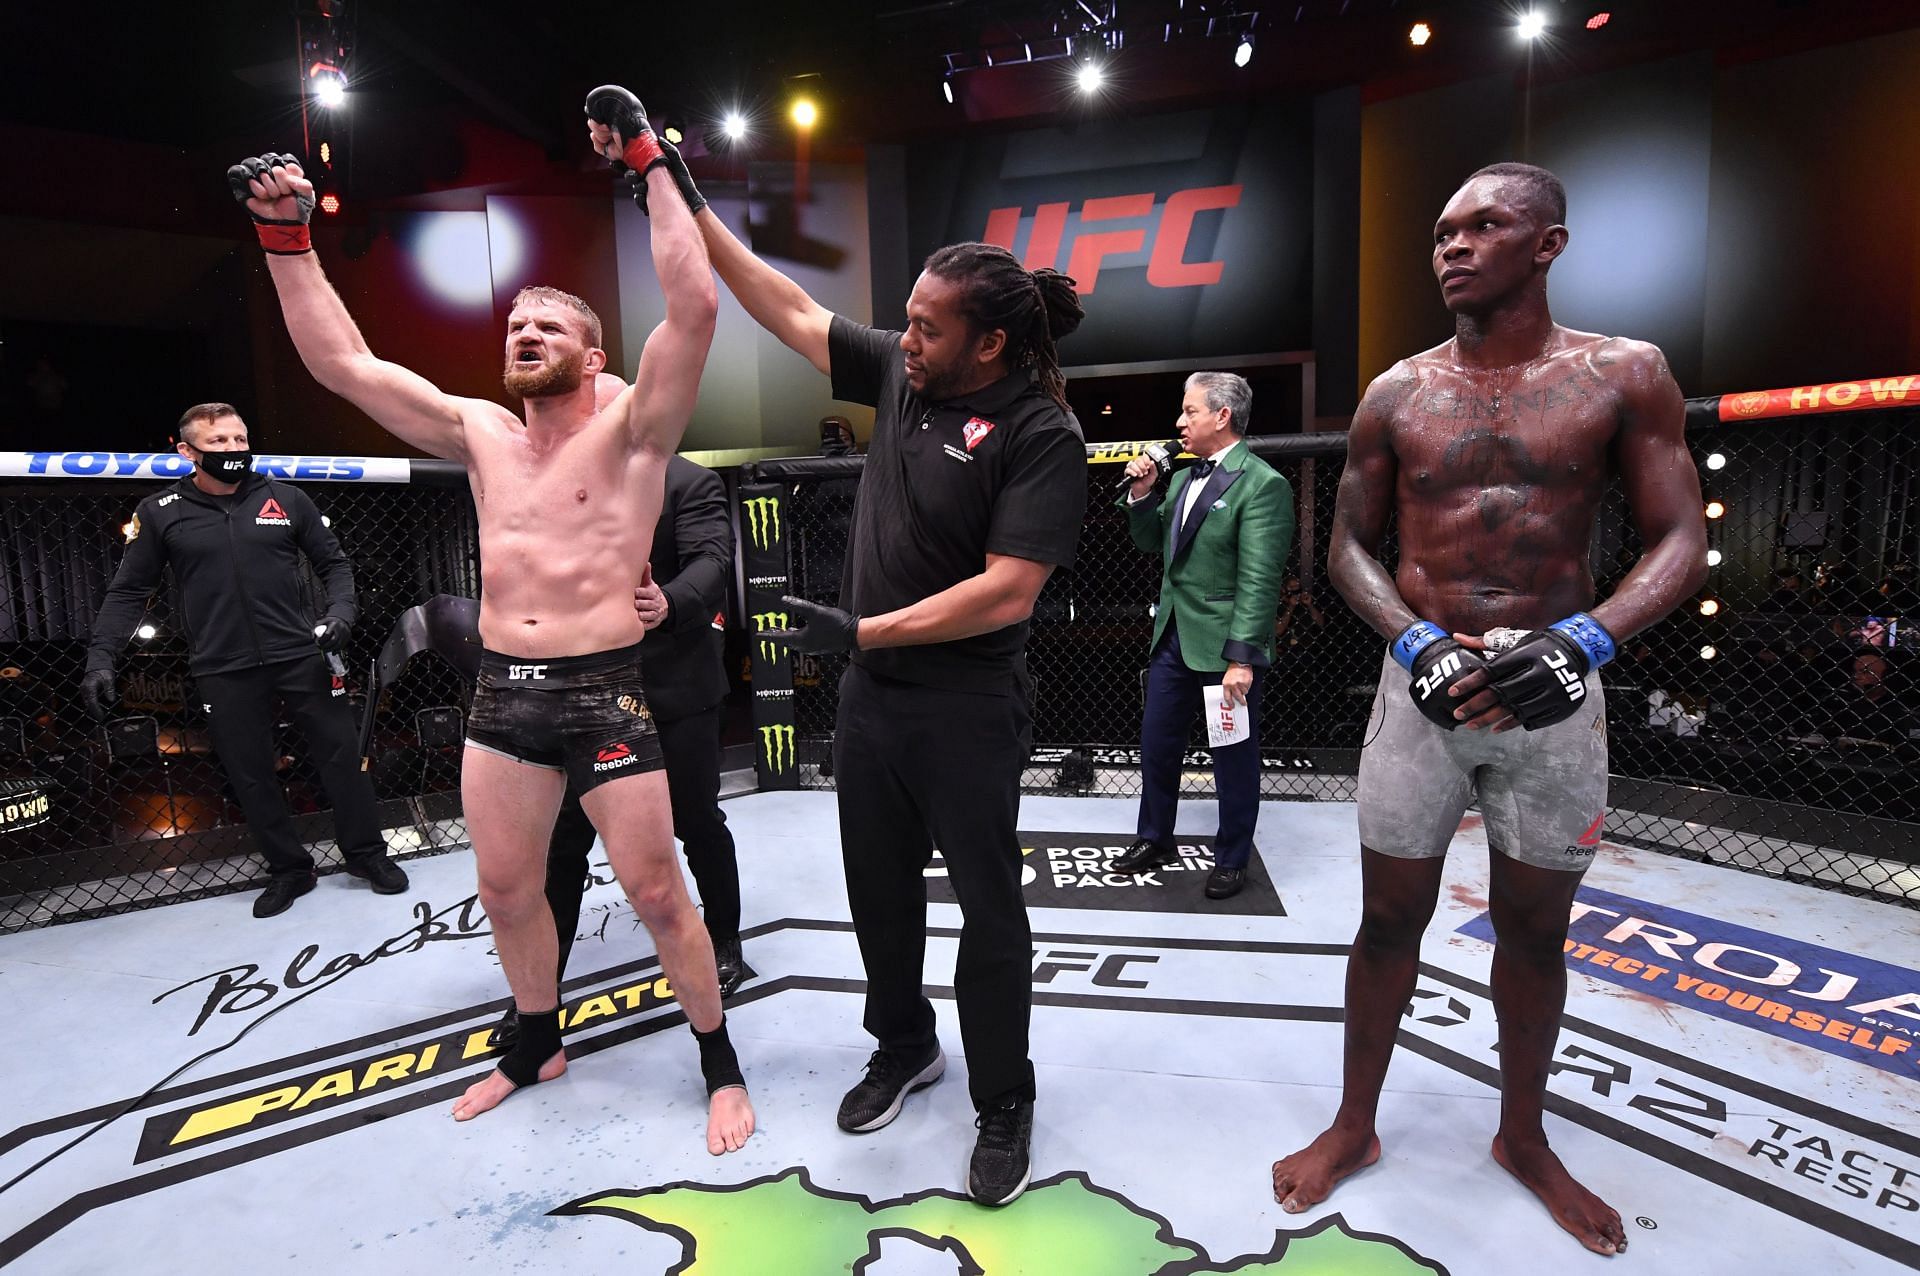 Israel Adesanya came up short in his challenge against then-205lbs champ Jan Blachowicz